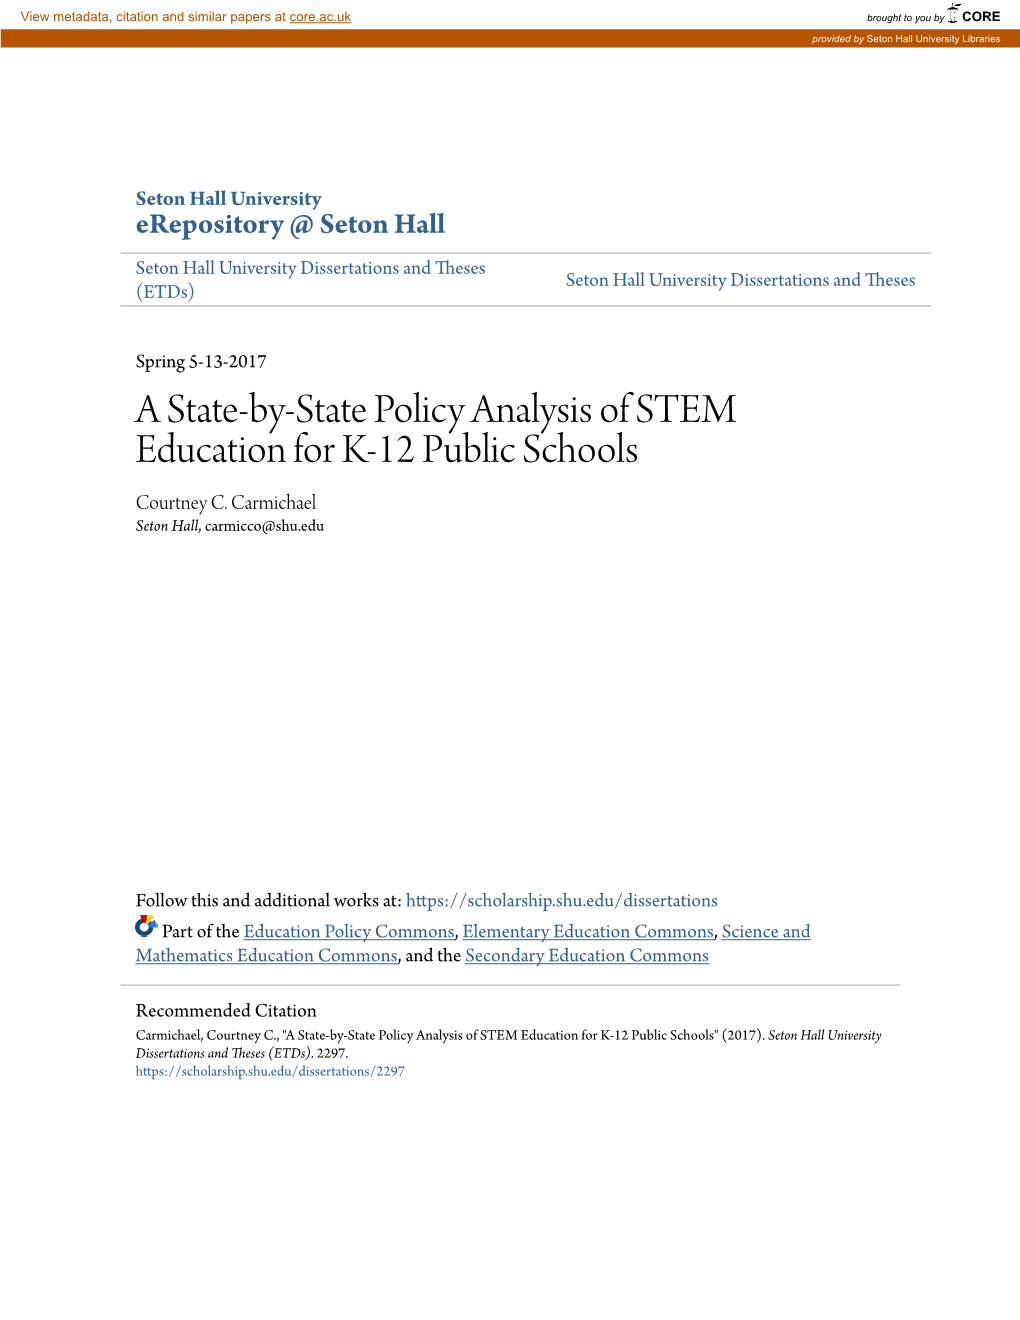 A State-By-State Policy Analysis of STEM Education for K-12 Public Schools Courtney C